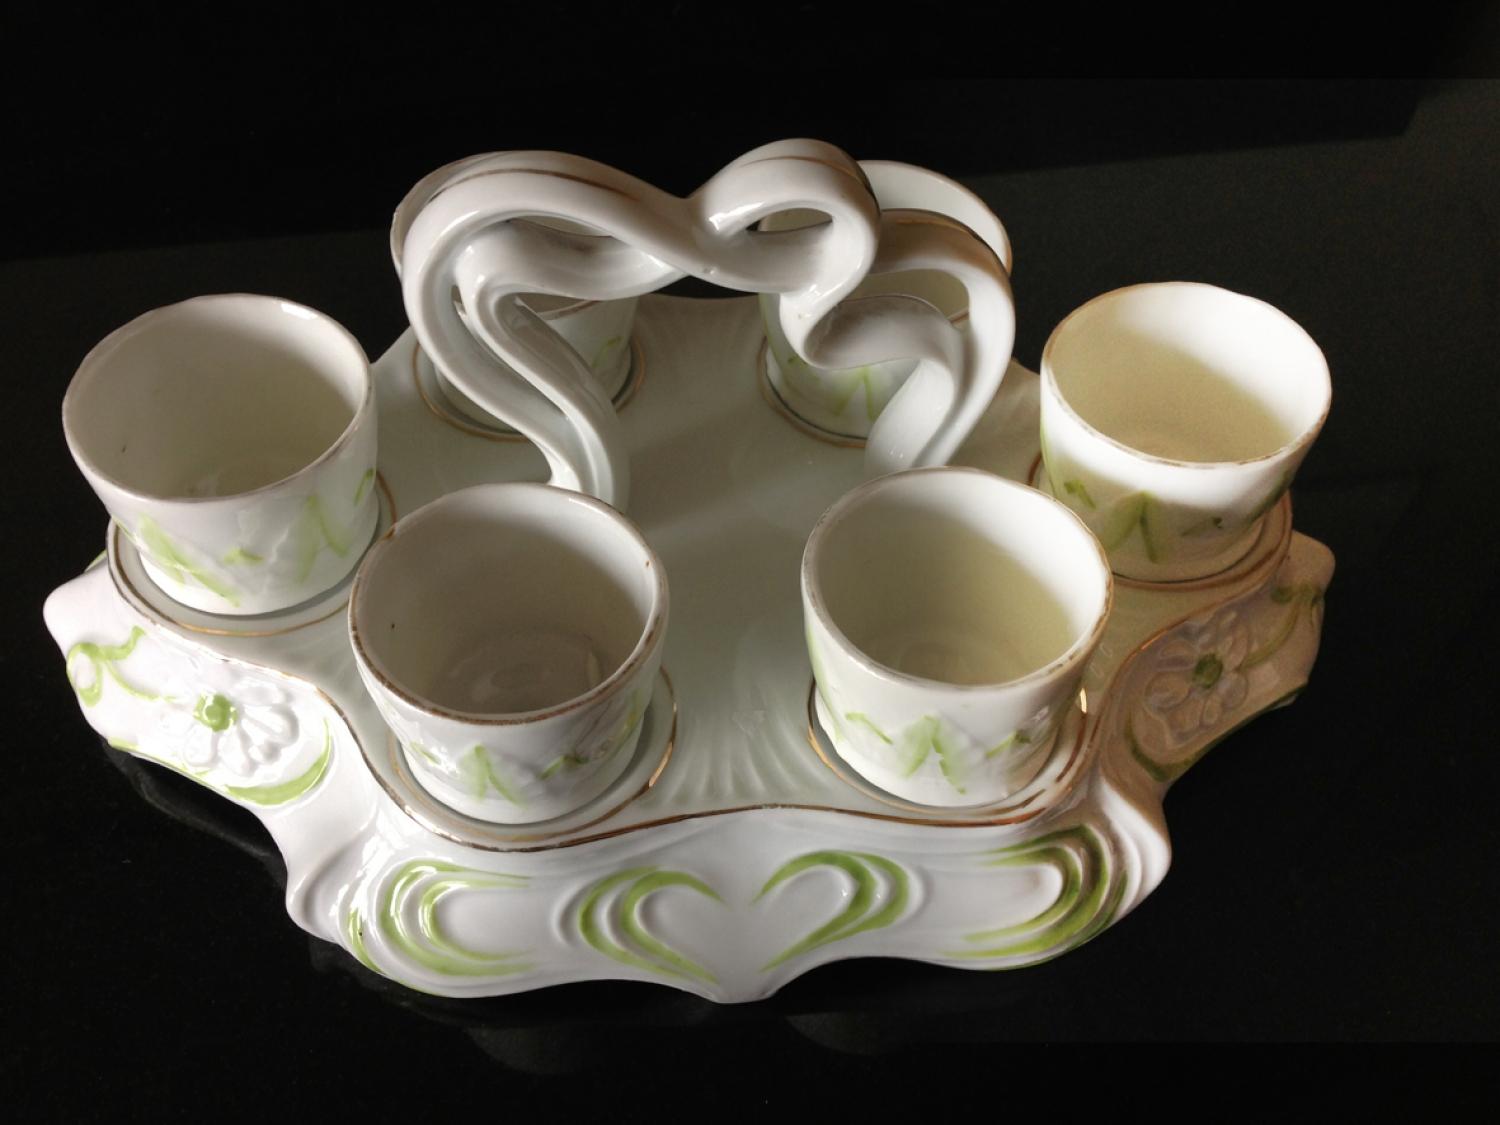 Edwardian Egg Stand with Egg Cups